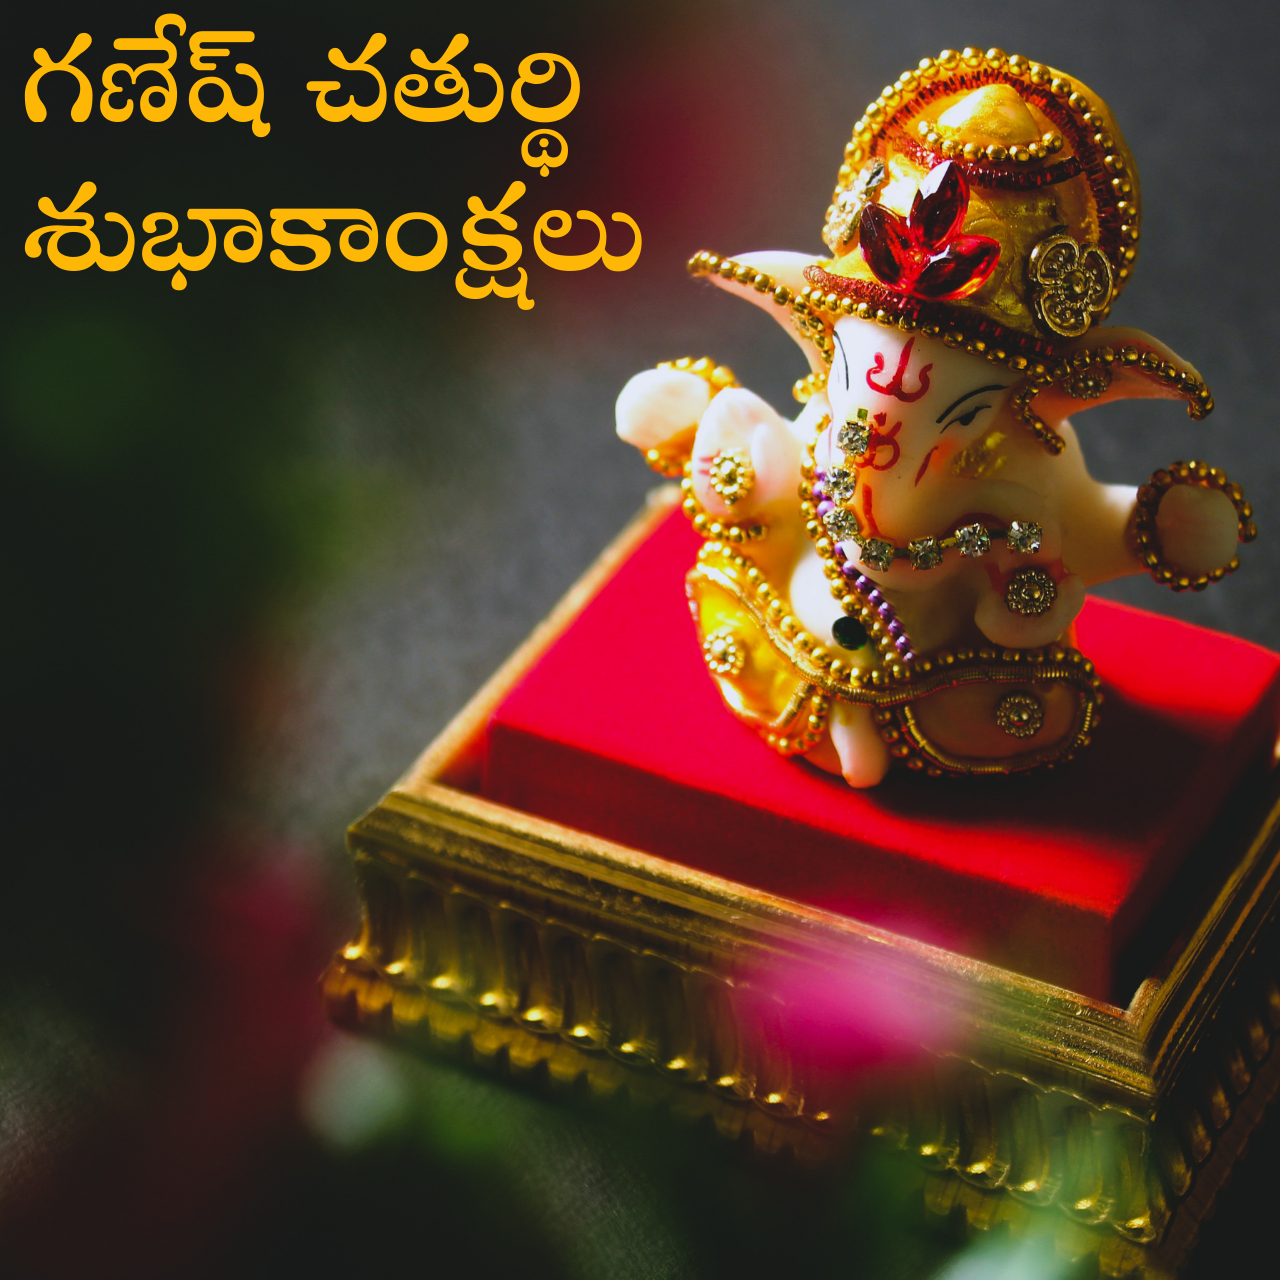 Ganesh Chaturthi 2021 Telugu Wishes Quotes Hd Images Messages Greetings And Status To Share 6205